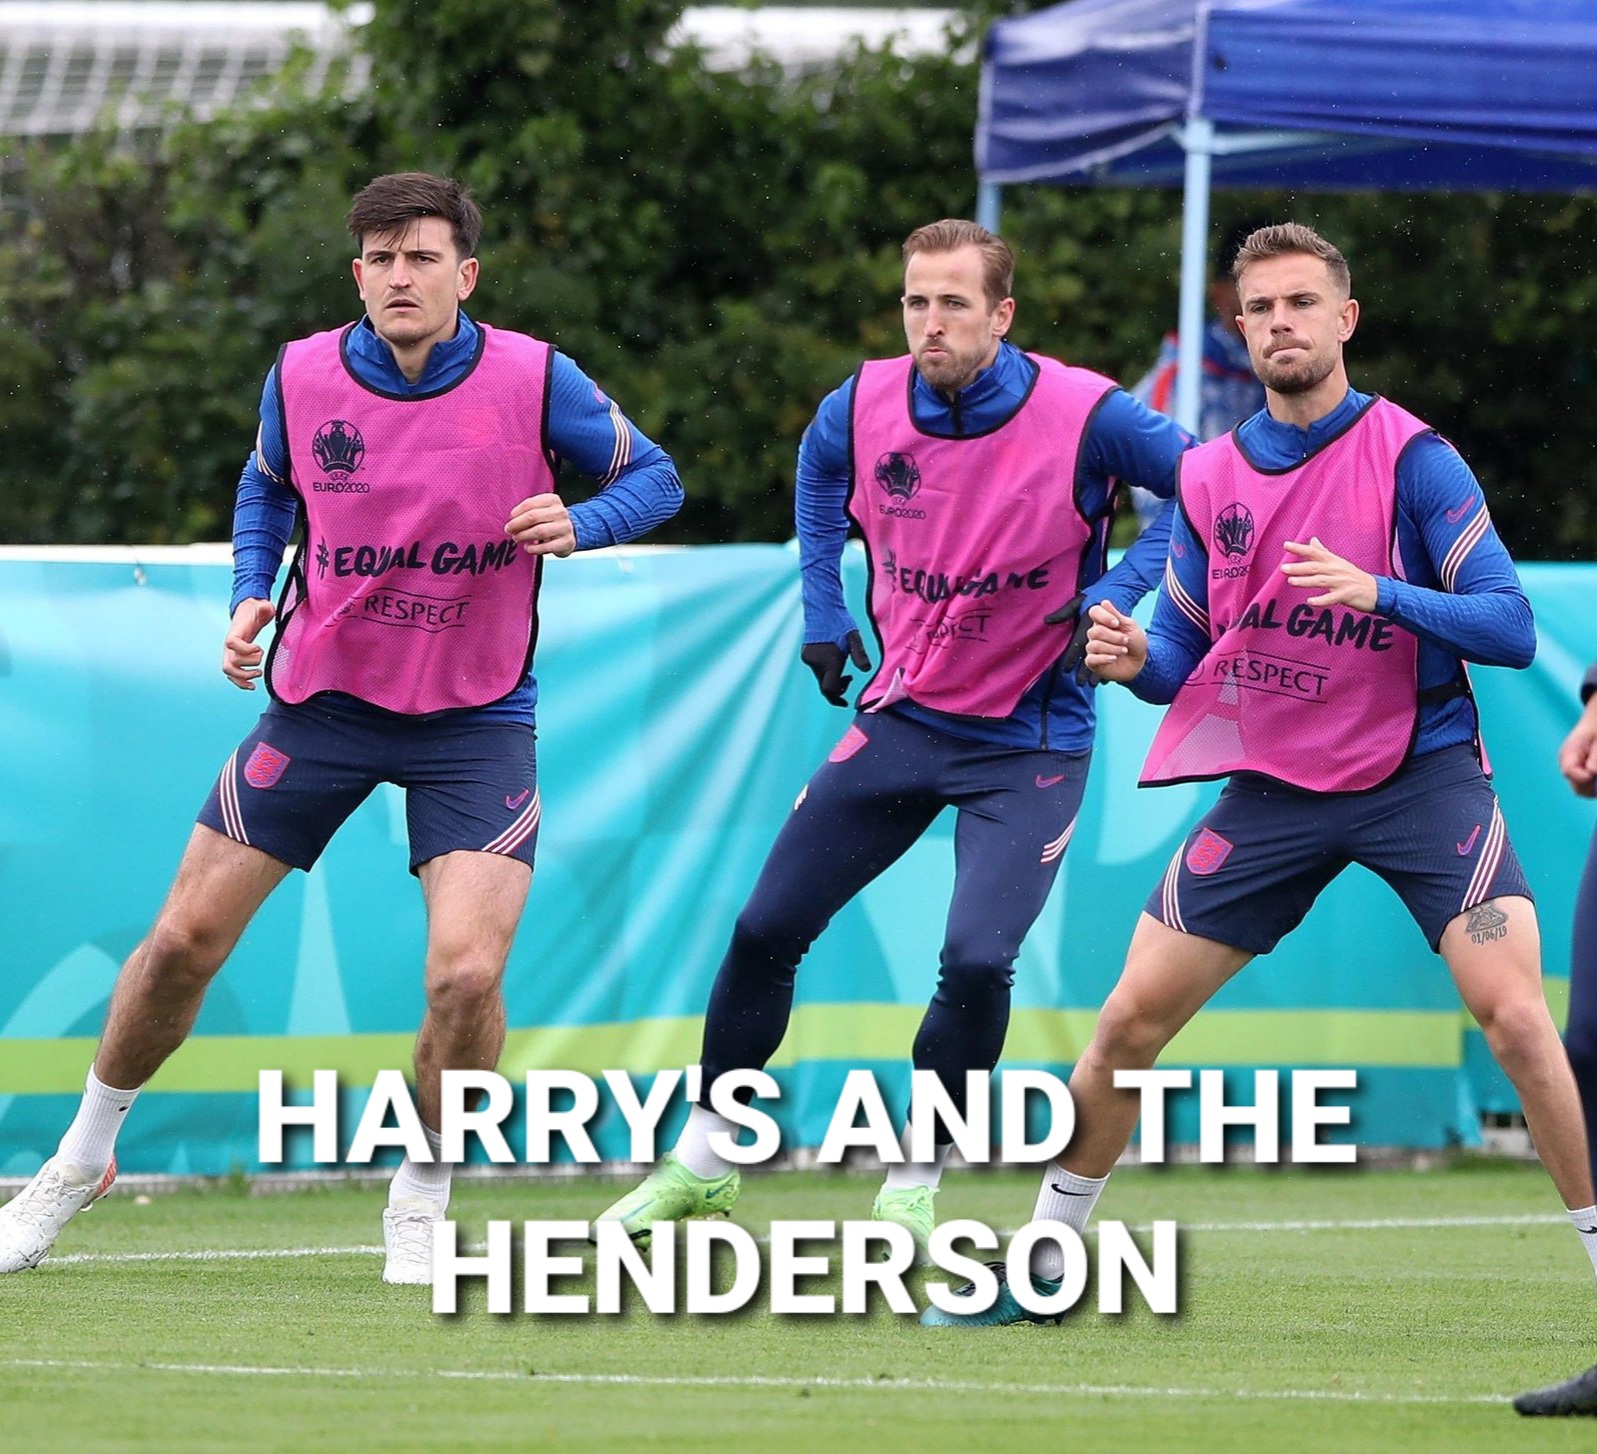 Harry\'s and the Henserson